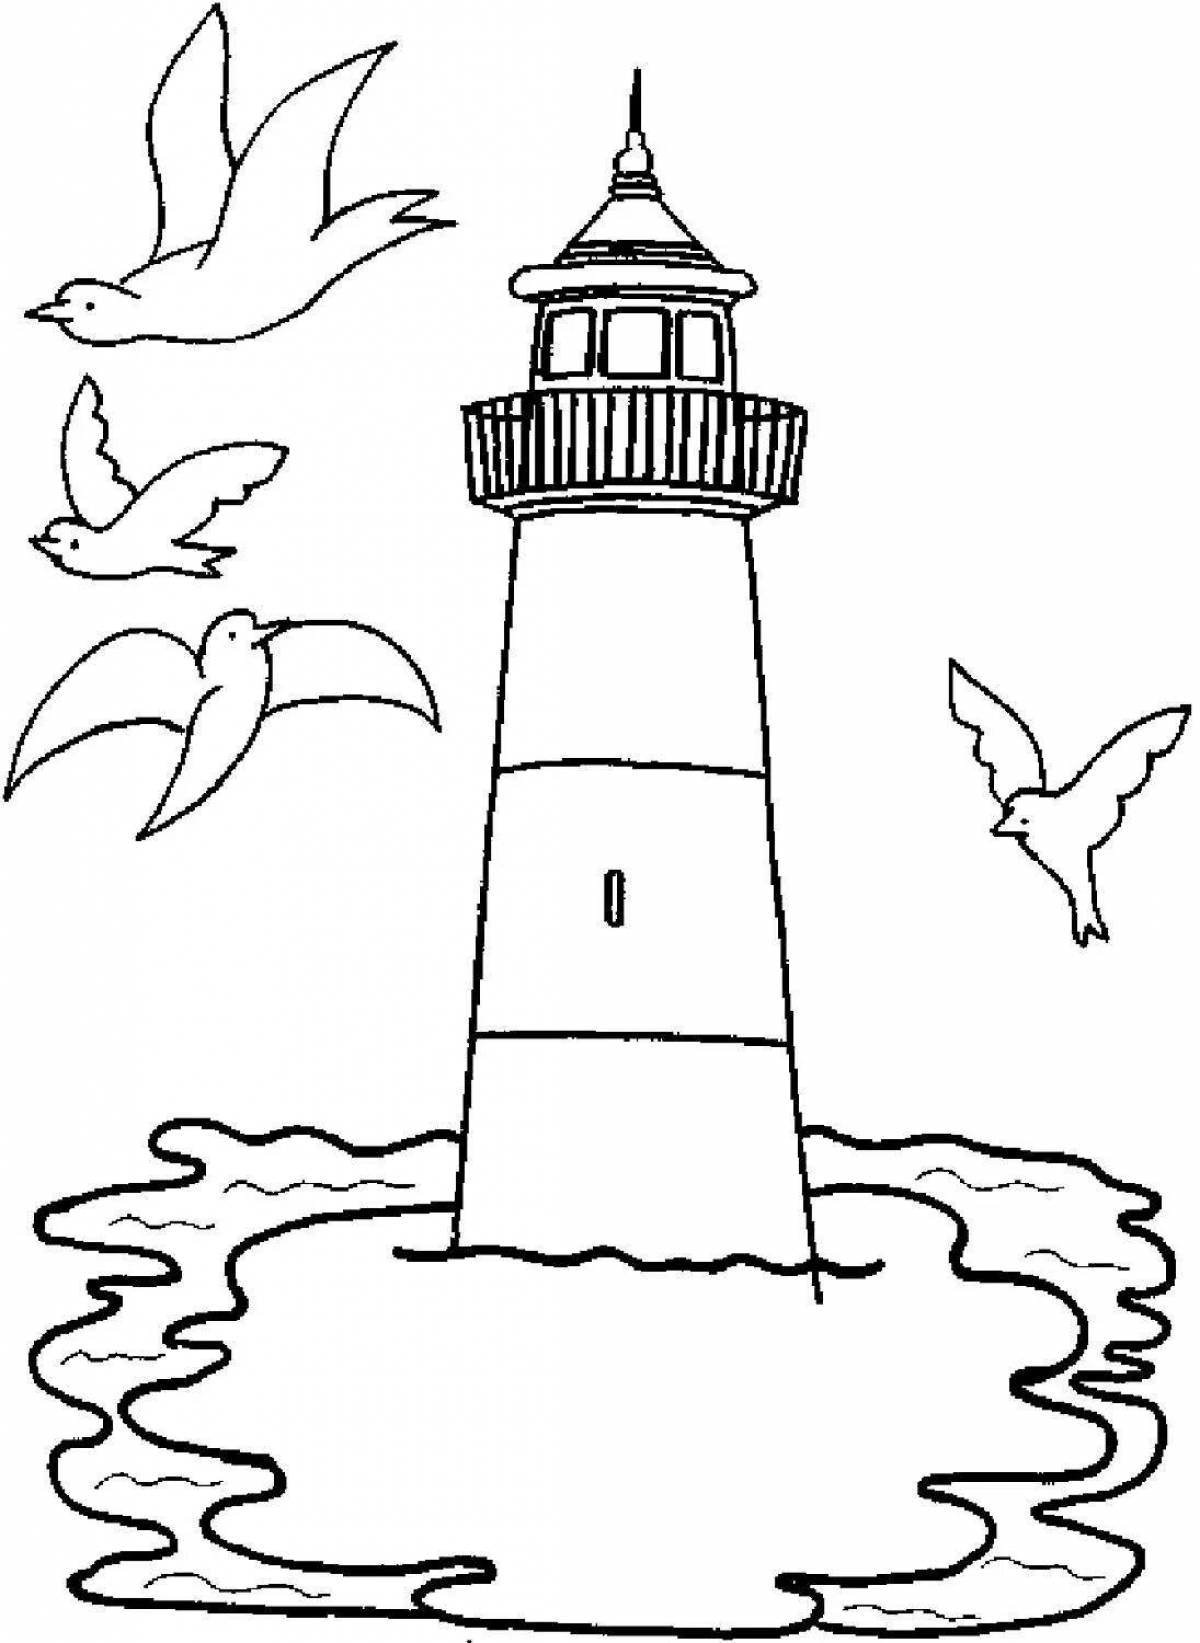 Bright crimea coloring pages for kids